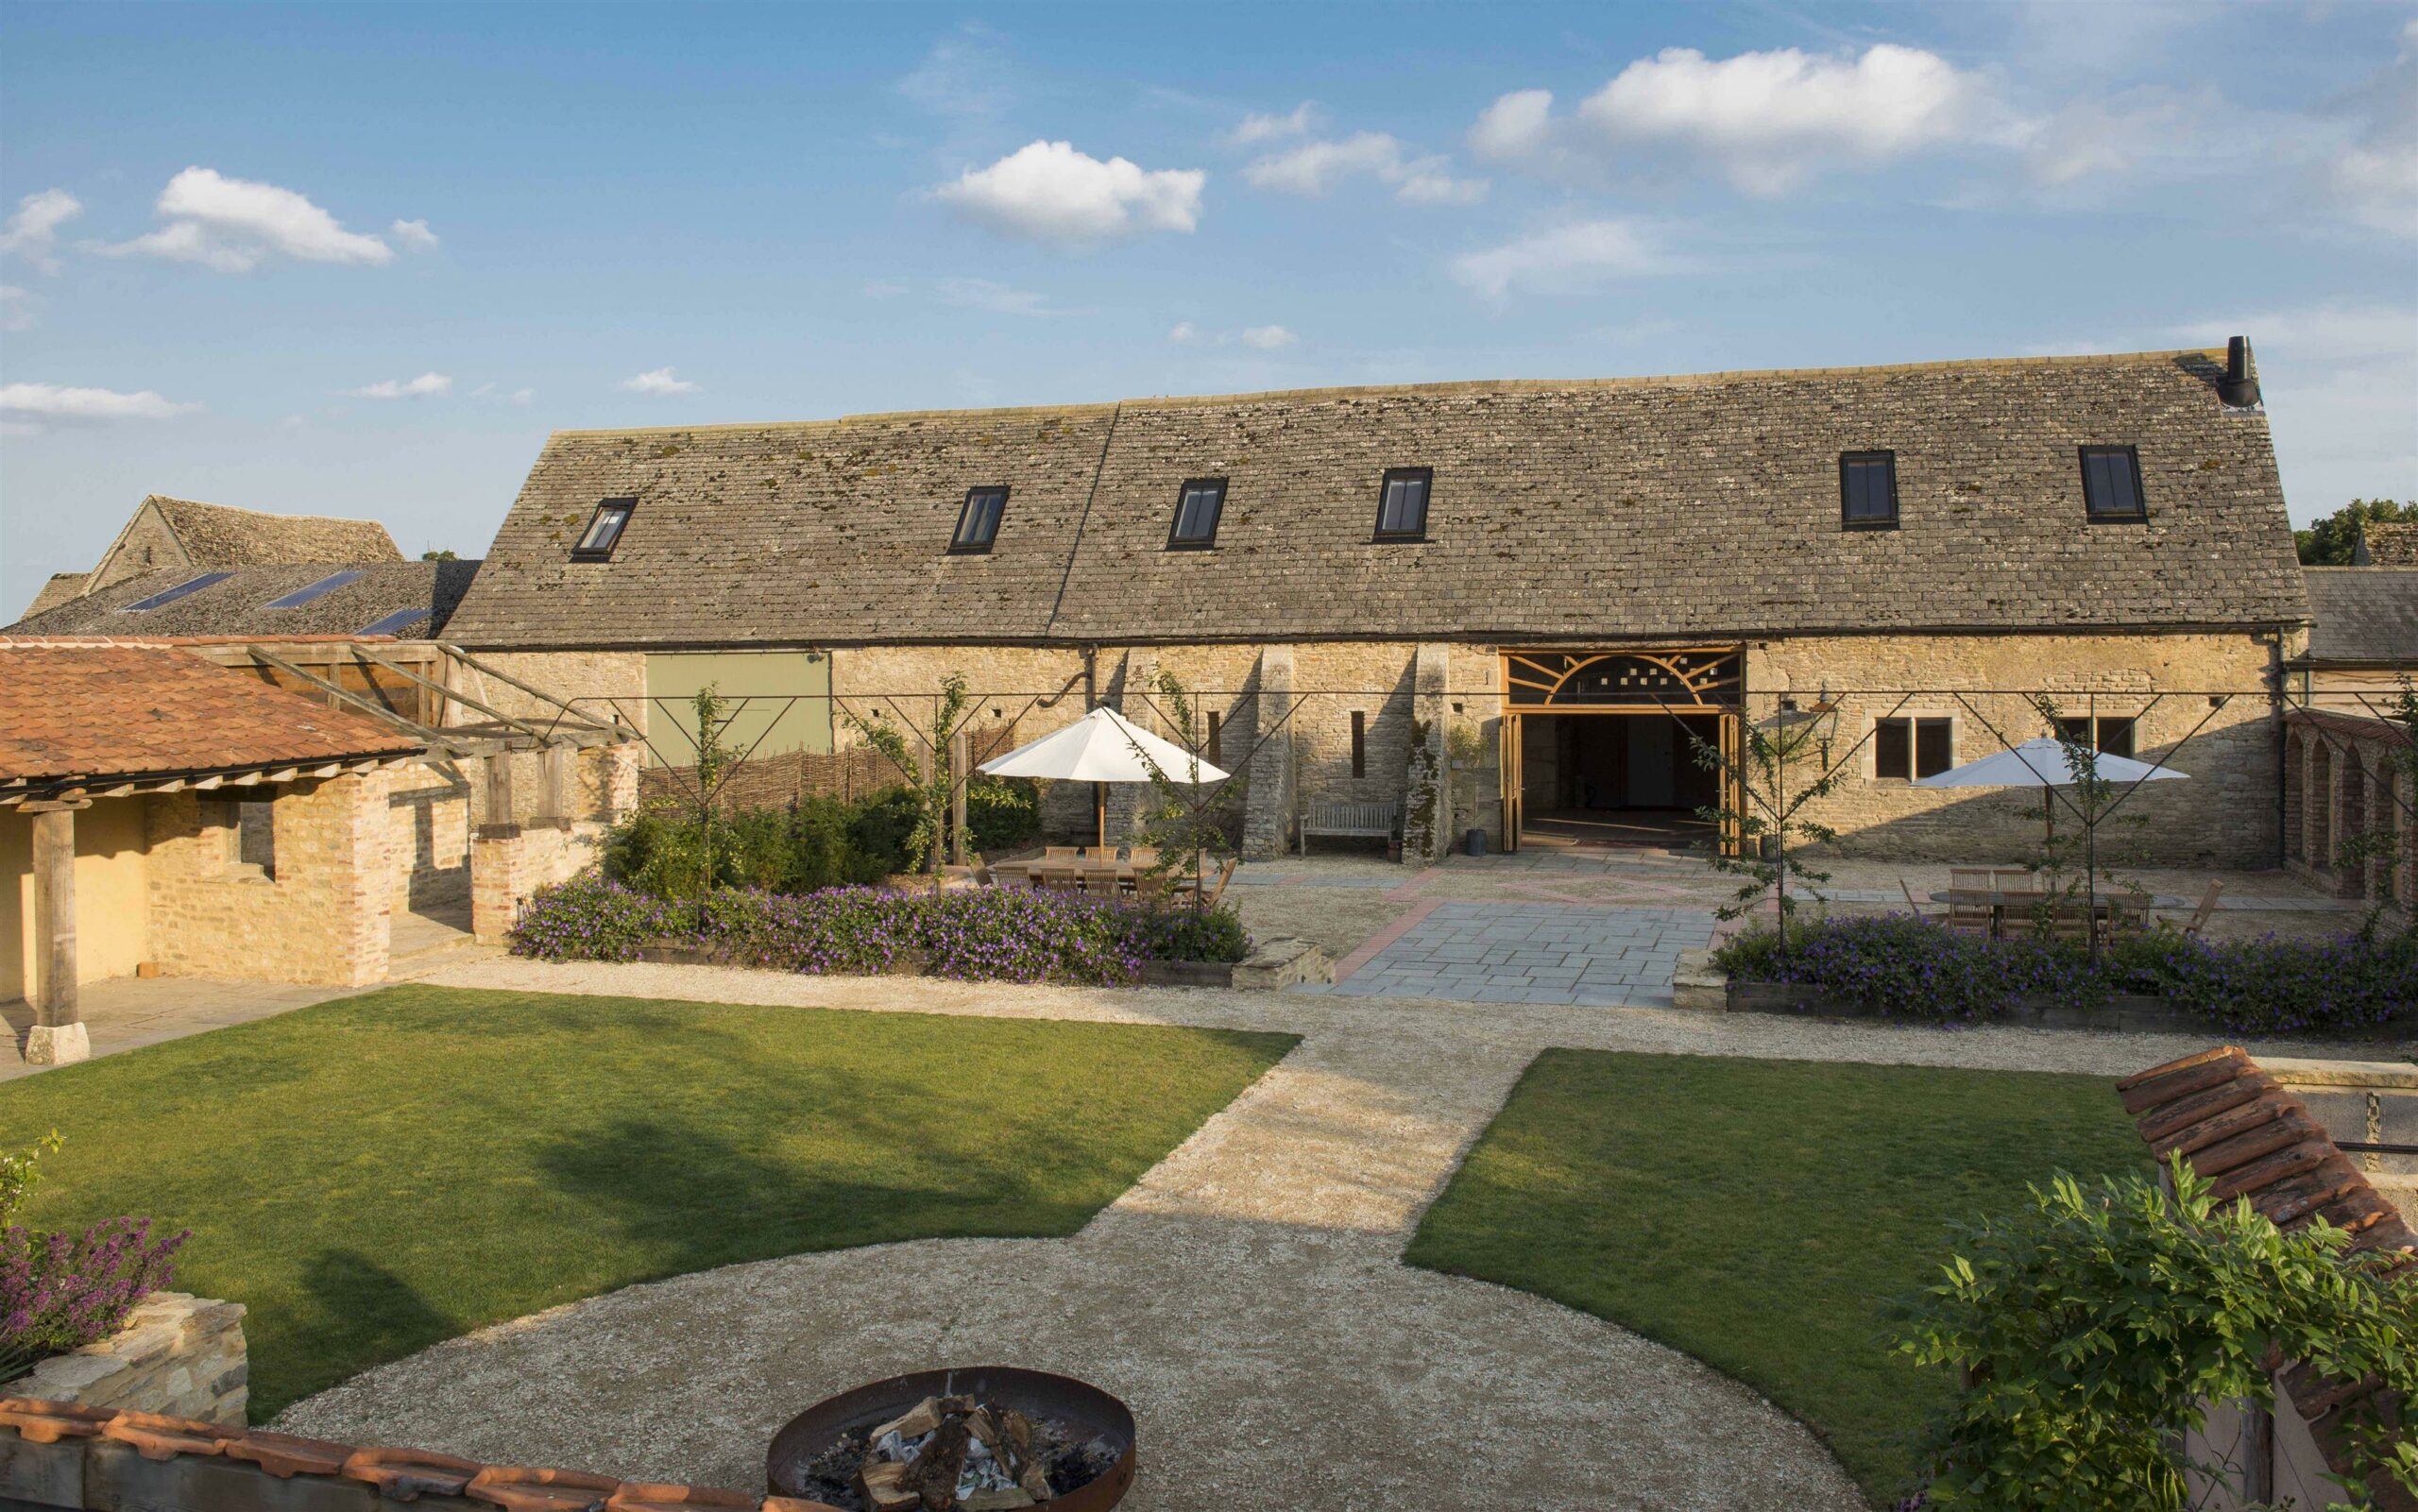 Oxleaze Barn is a classic wedding venue with lots of rustic charm